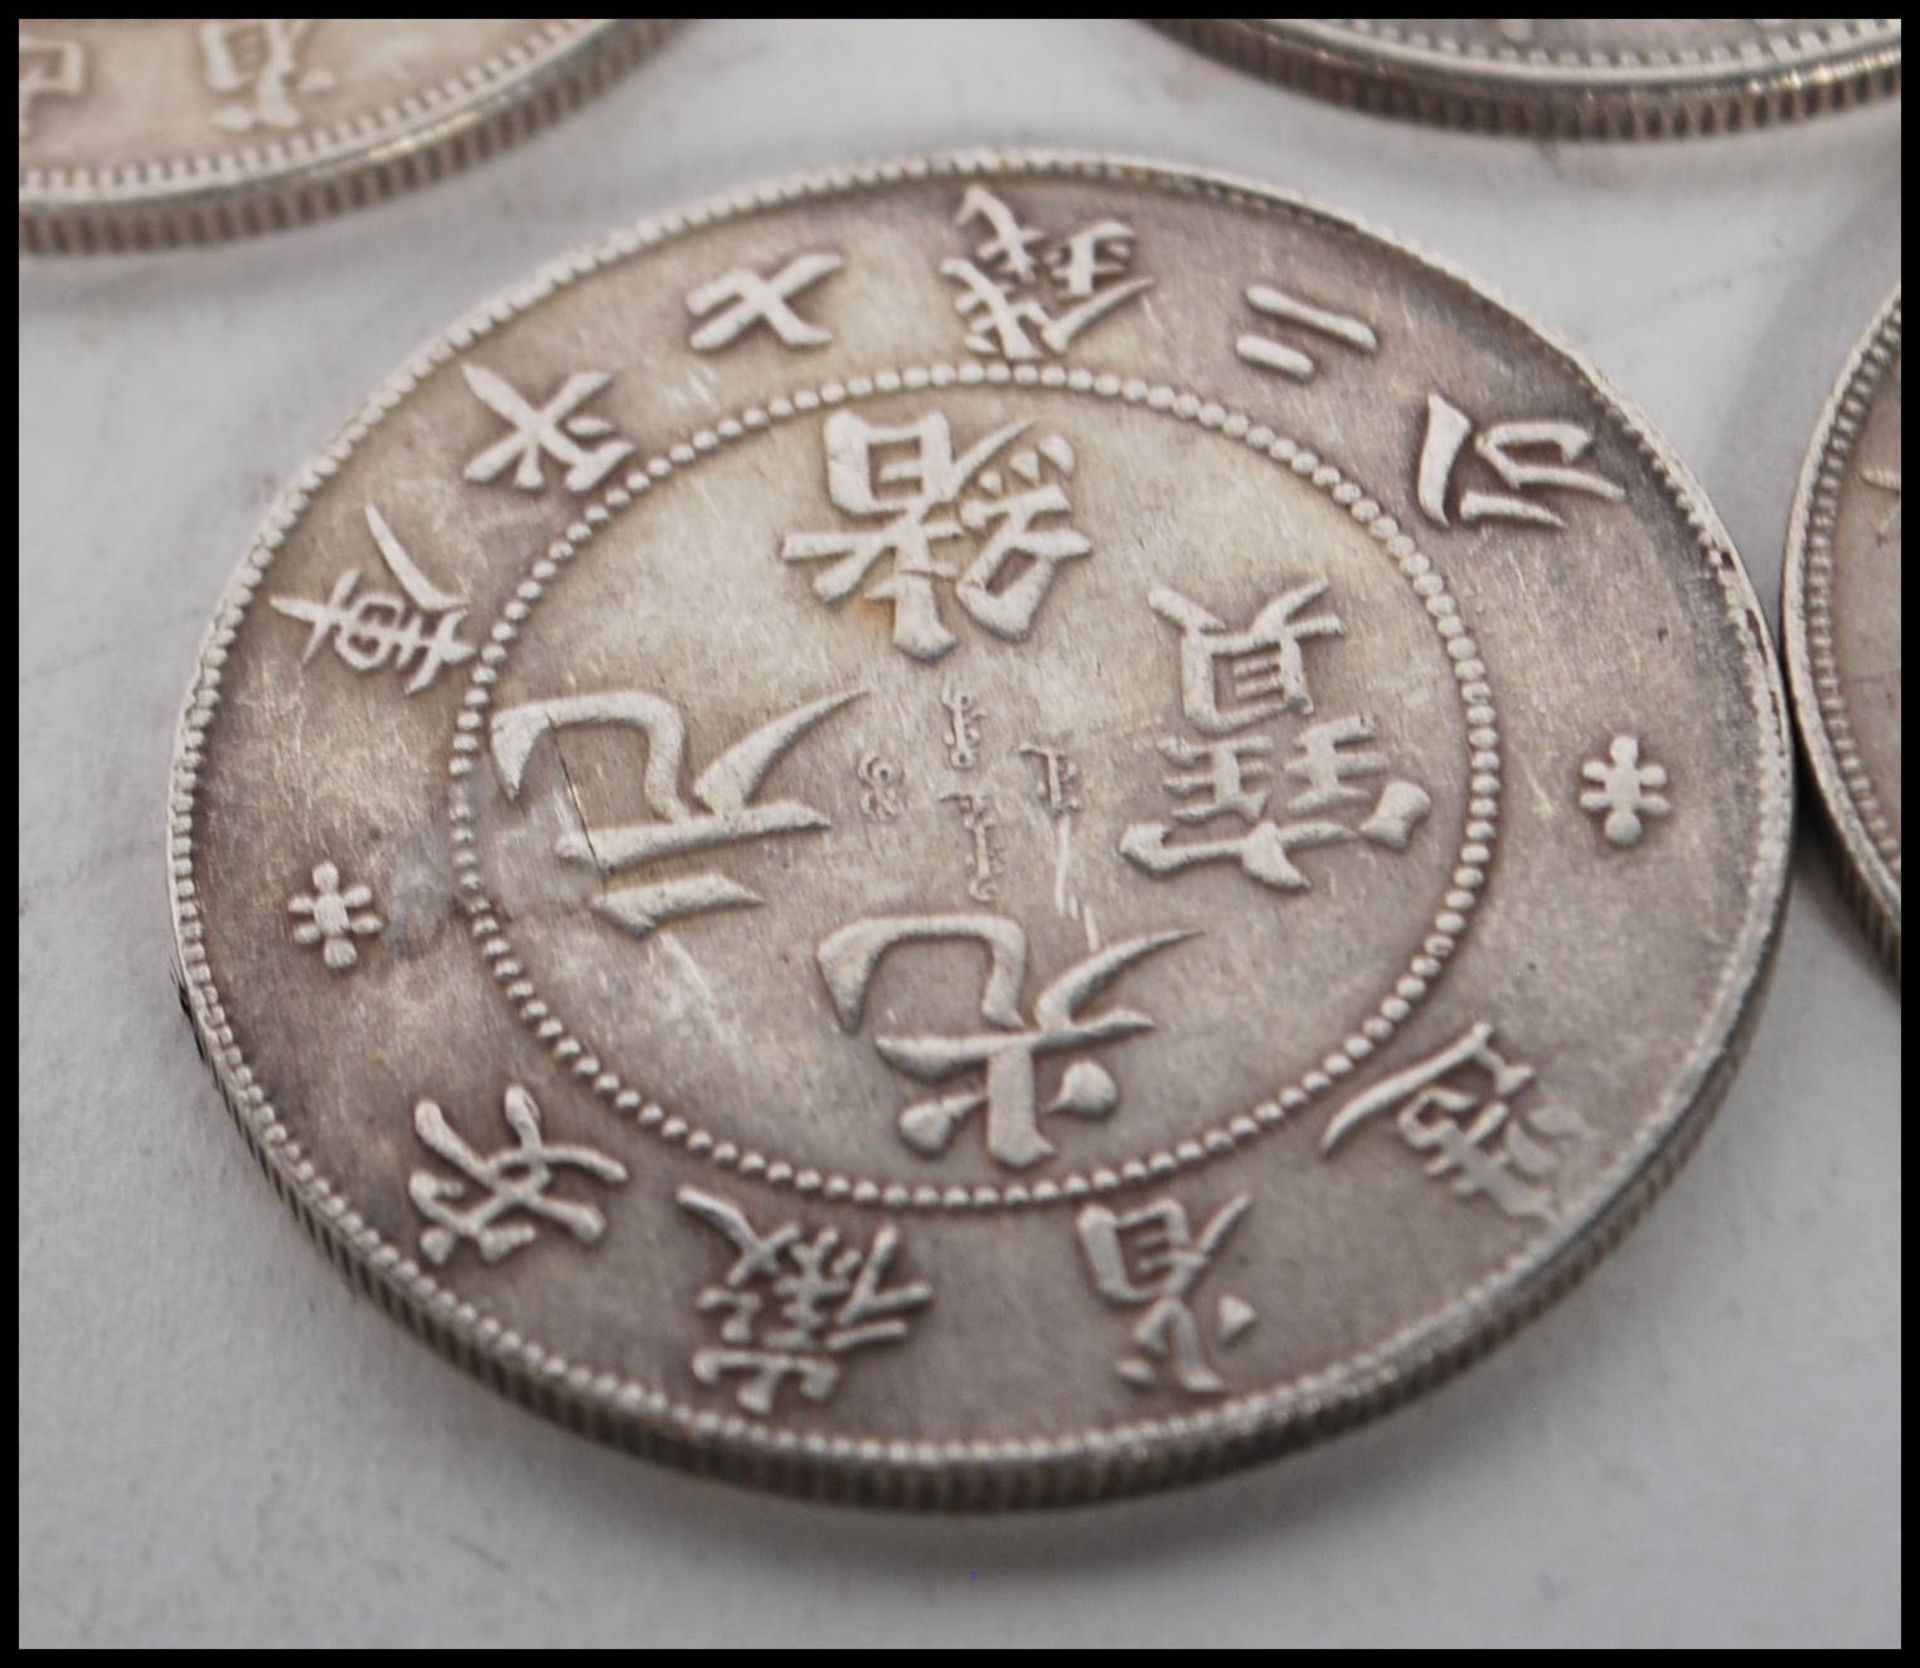 A collection of Chinese coins to include five kwang-tung province coins marked mace and 2 - Image 5 of 5